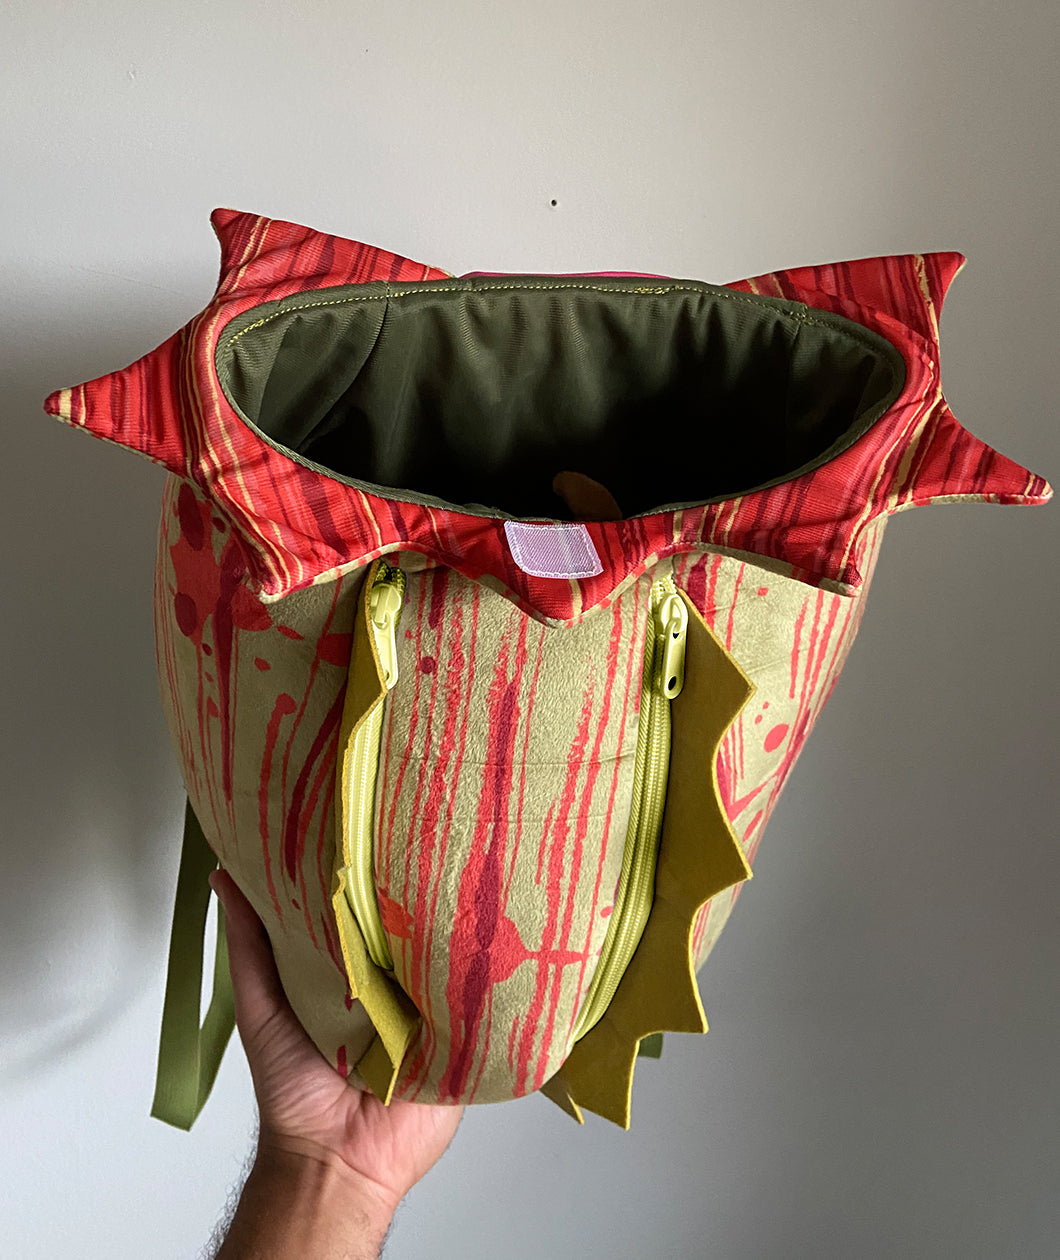 A soft, green and red backpack made to look like a pitcher plant. The top is jagged, the back has two zippers, each lined with spiky green and has solid green straps. From Tyler Thrasher.